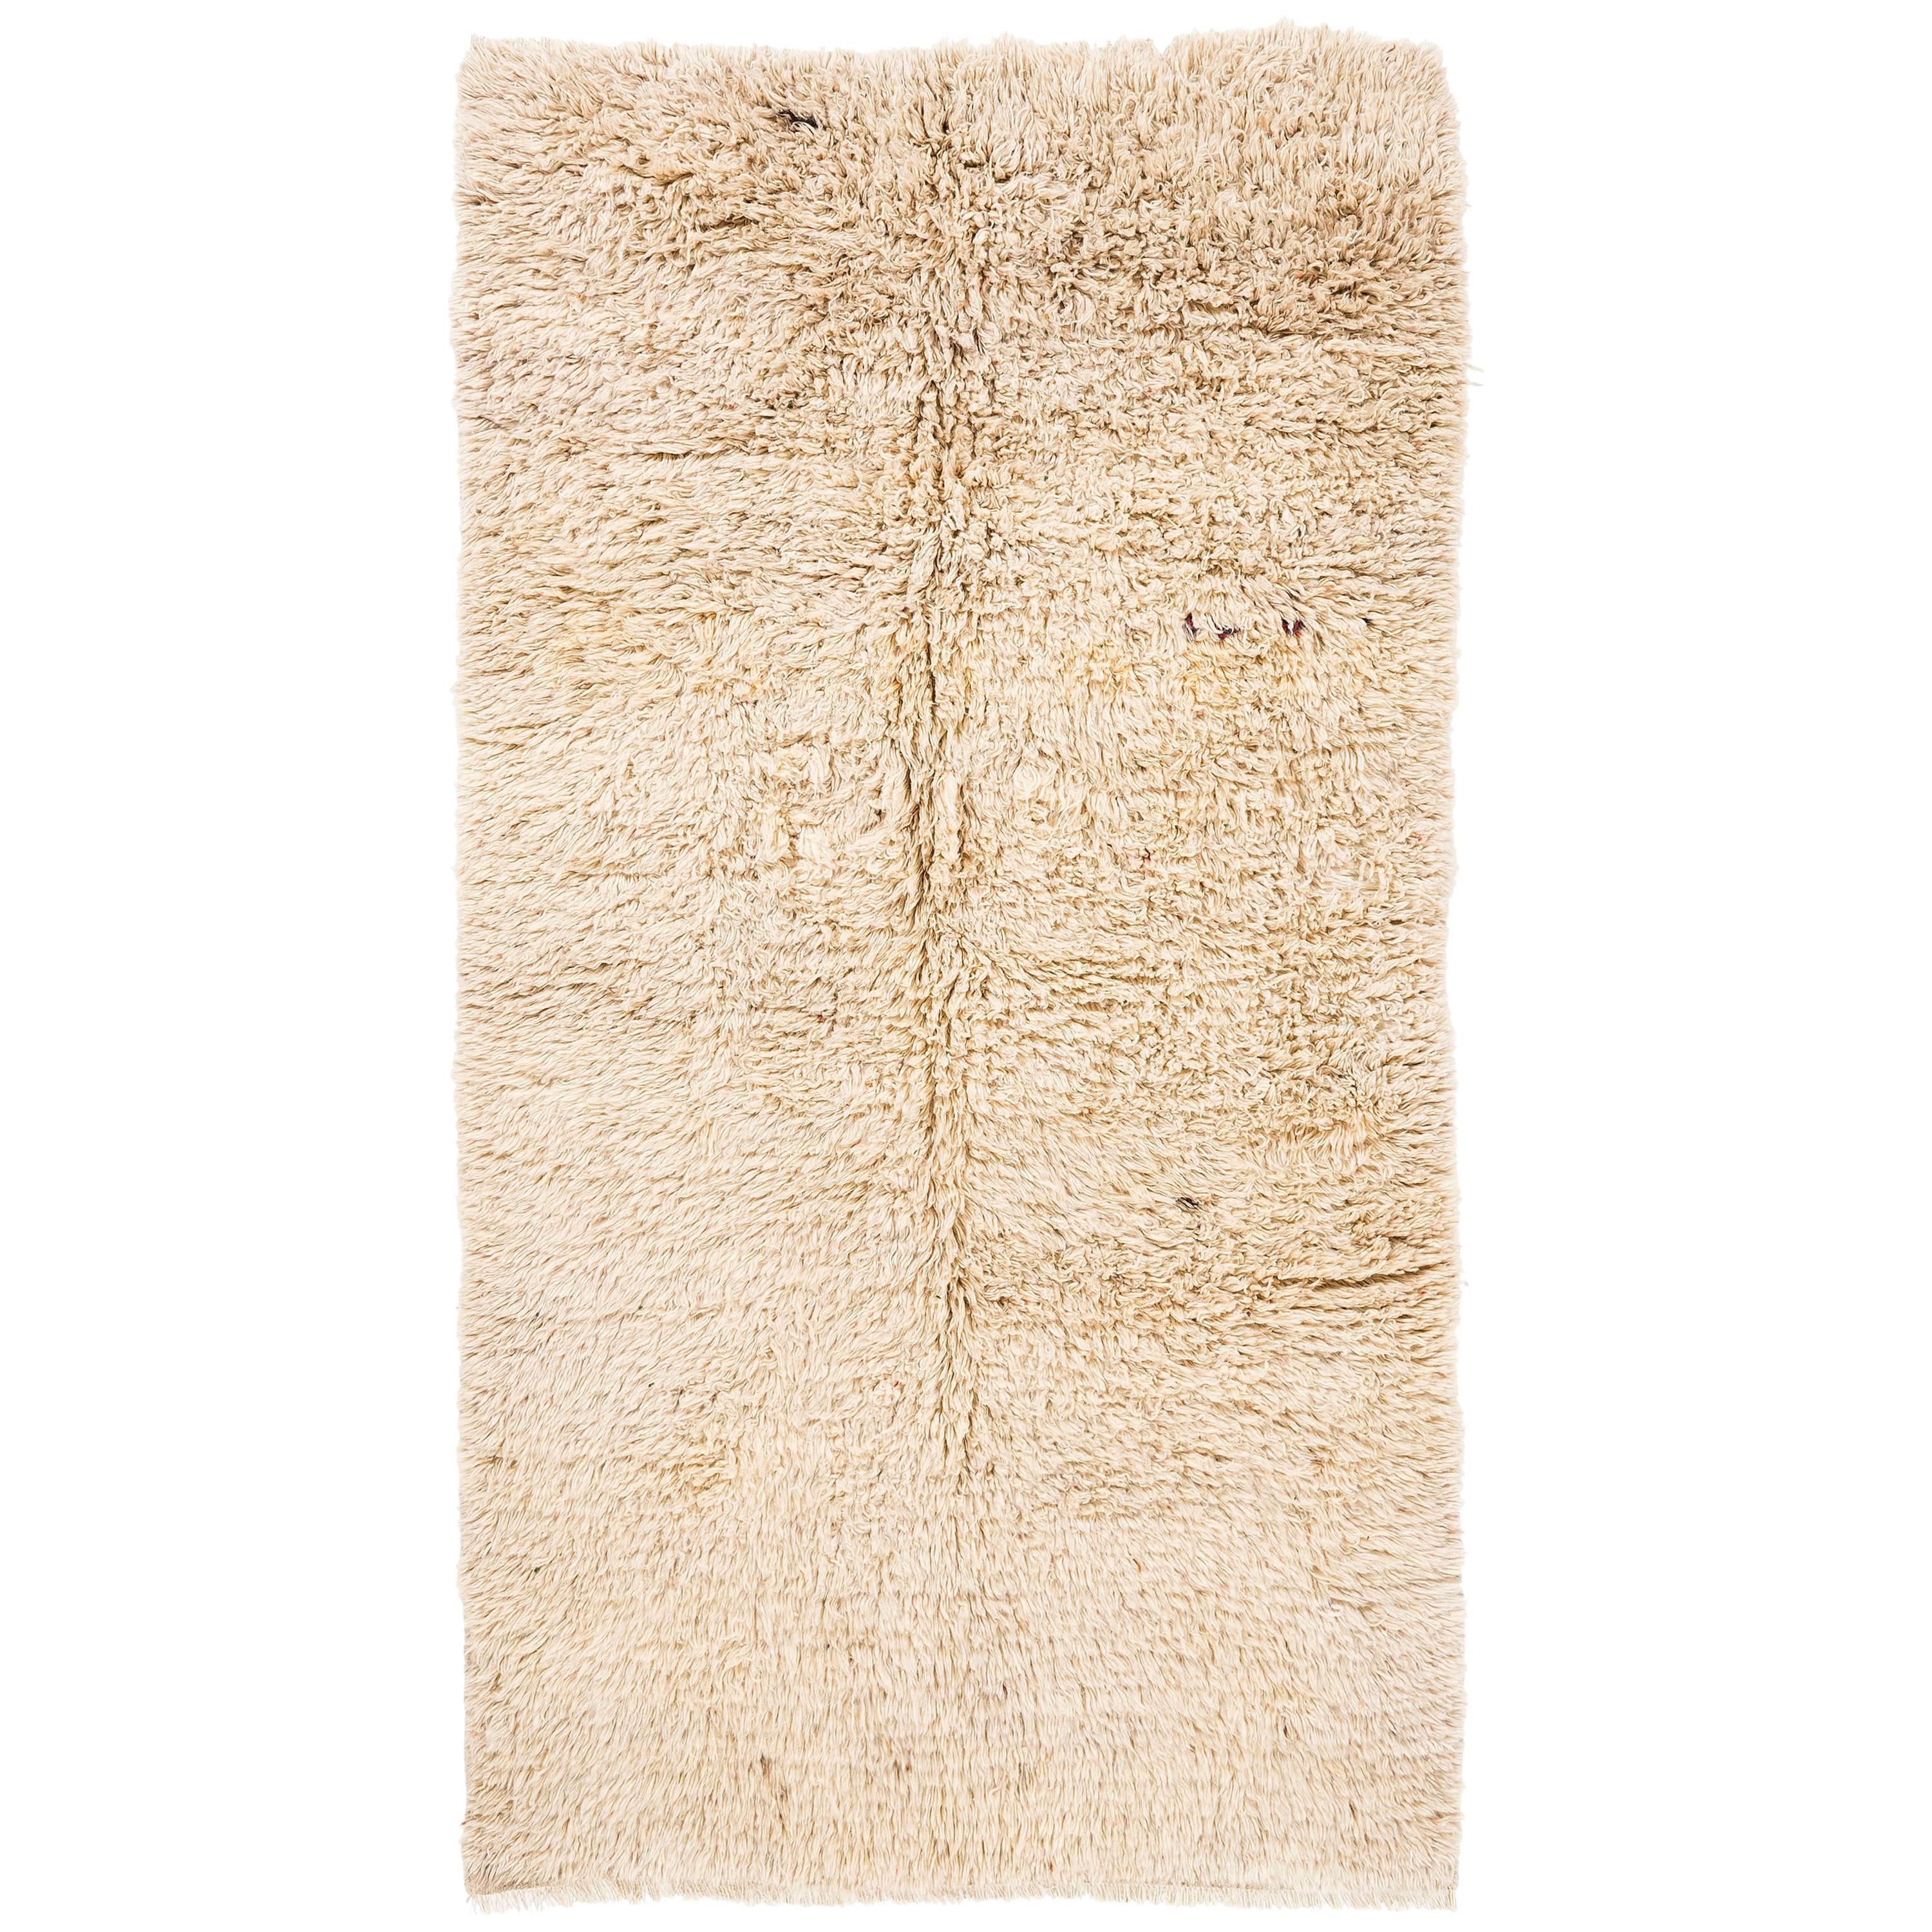 4.4x8.1 ft Plain Natural Handmade Wool Rug. Soft, Cozy, Thick Pile. Custom Ops